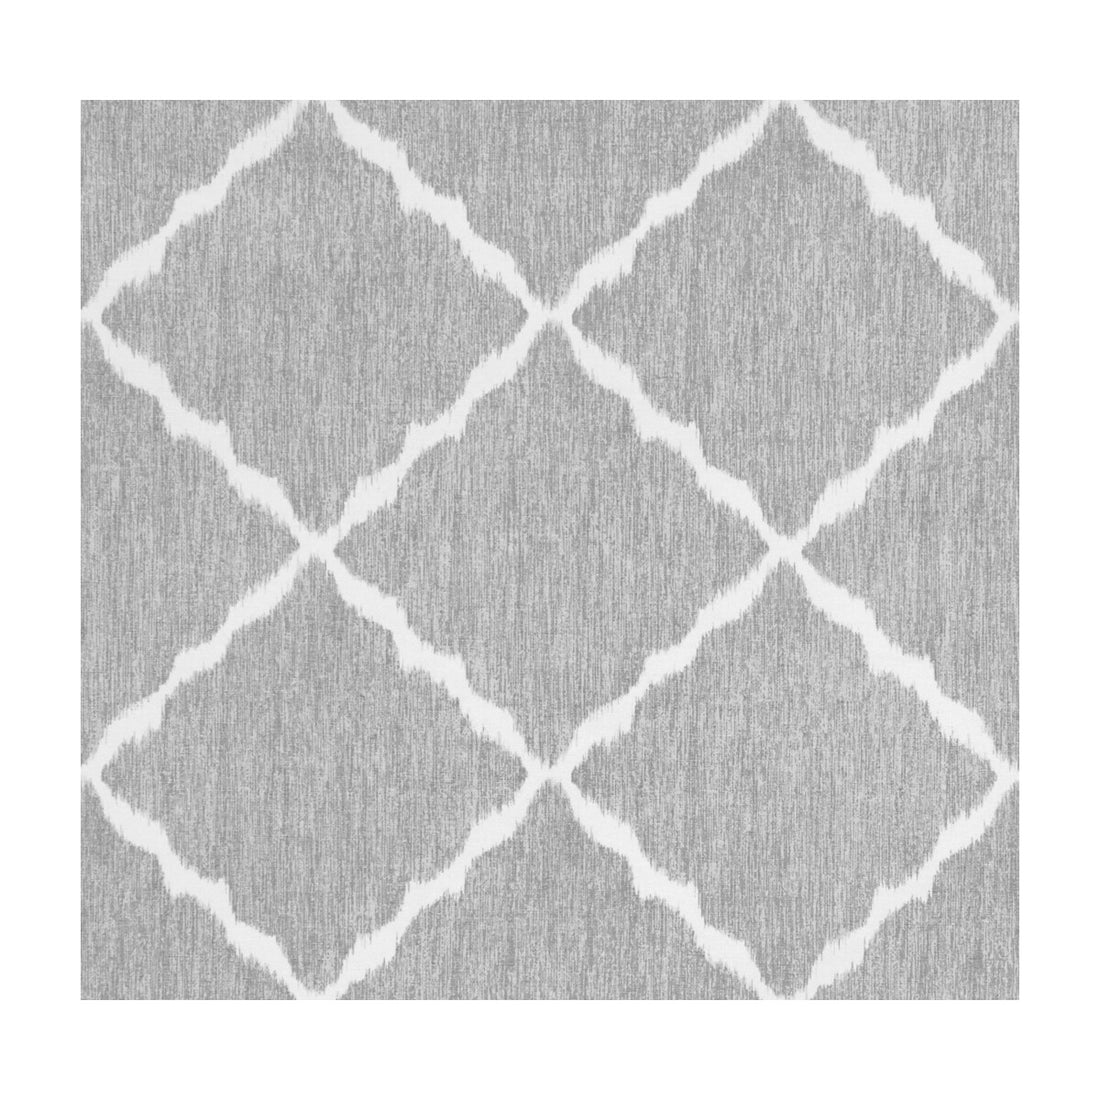 Ikat Strie fabric in pewter color - pattern IKATSTRIE.11.0 - by Kravet Basics in the Sarah Richardson Harmony collection